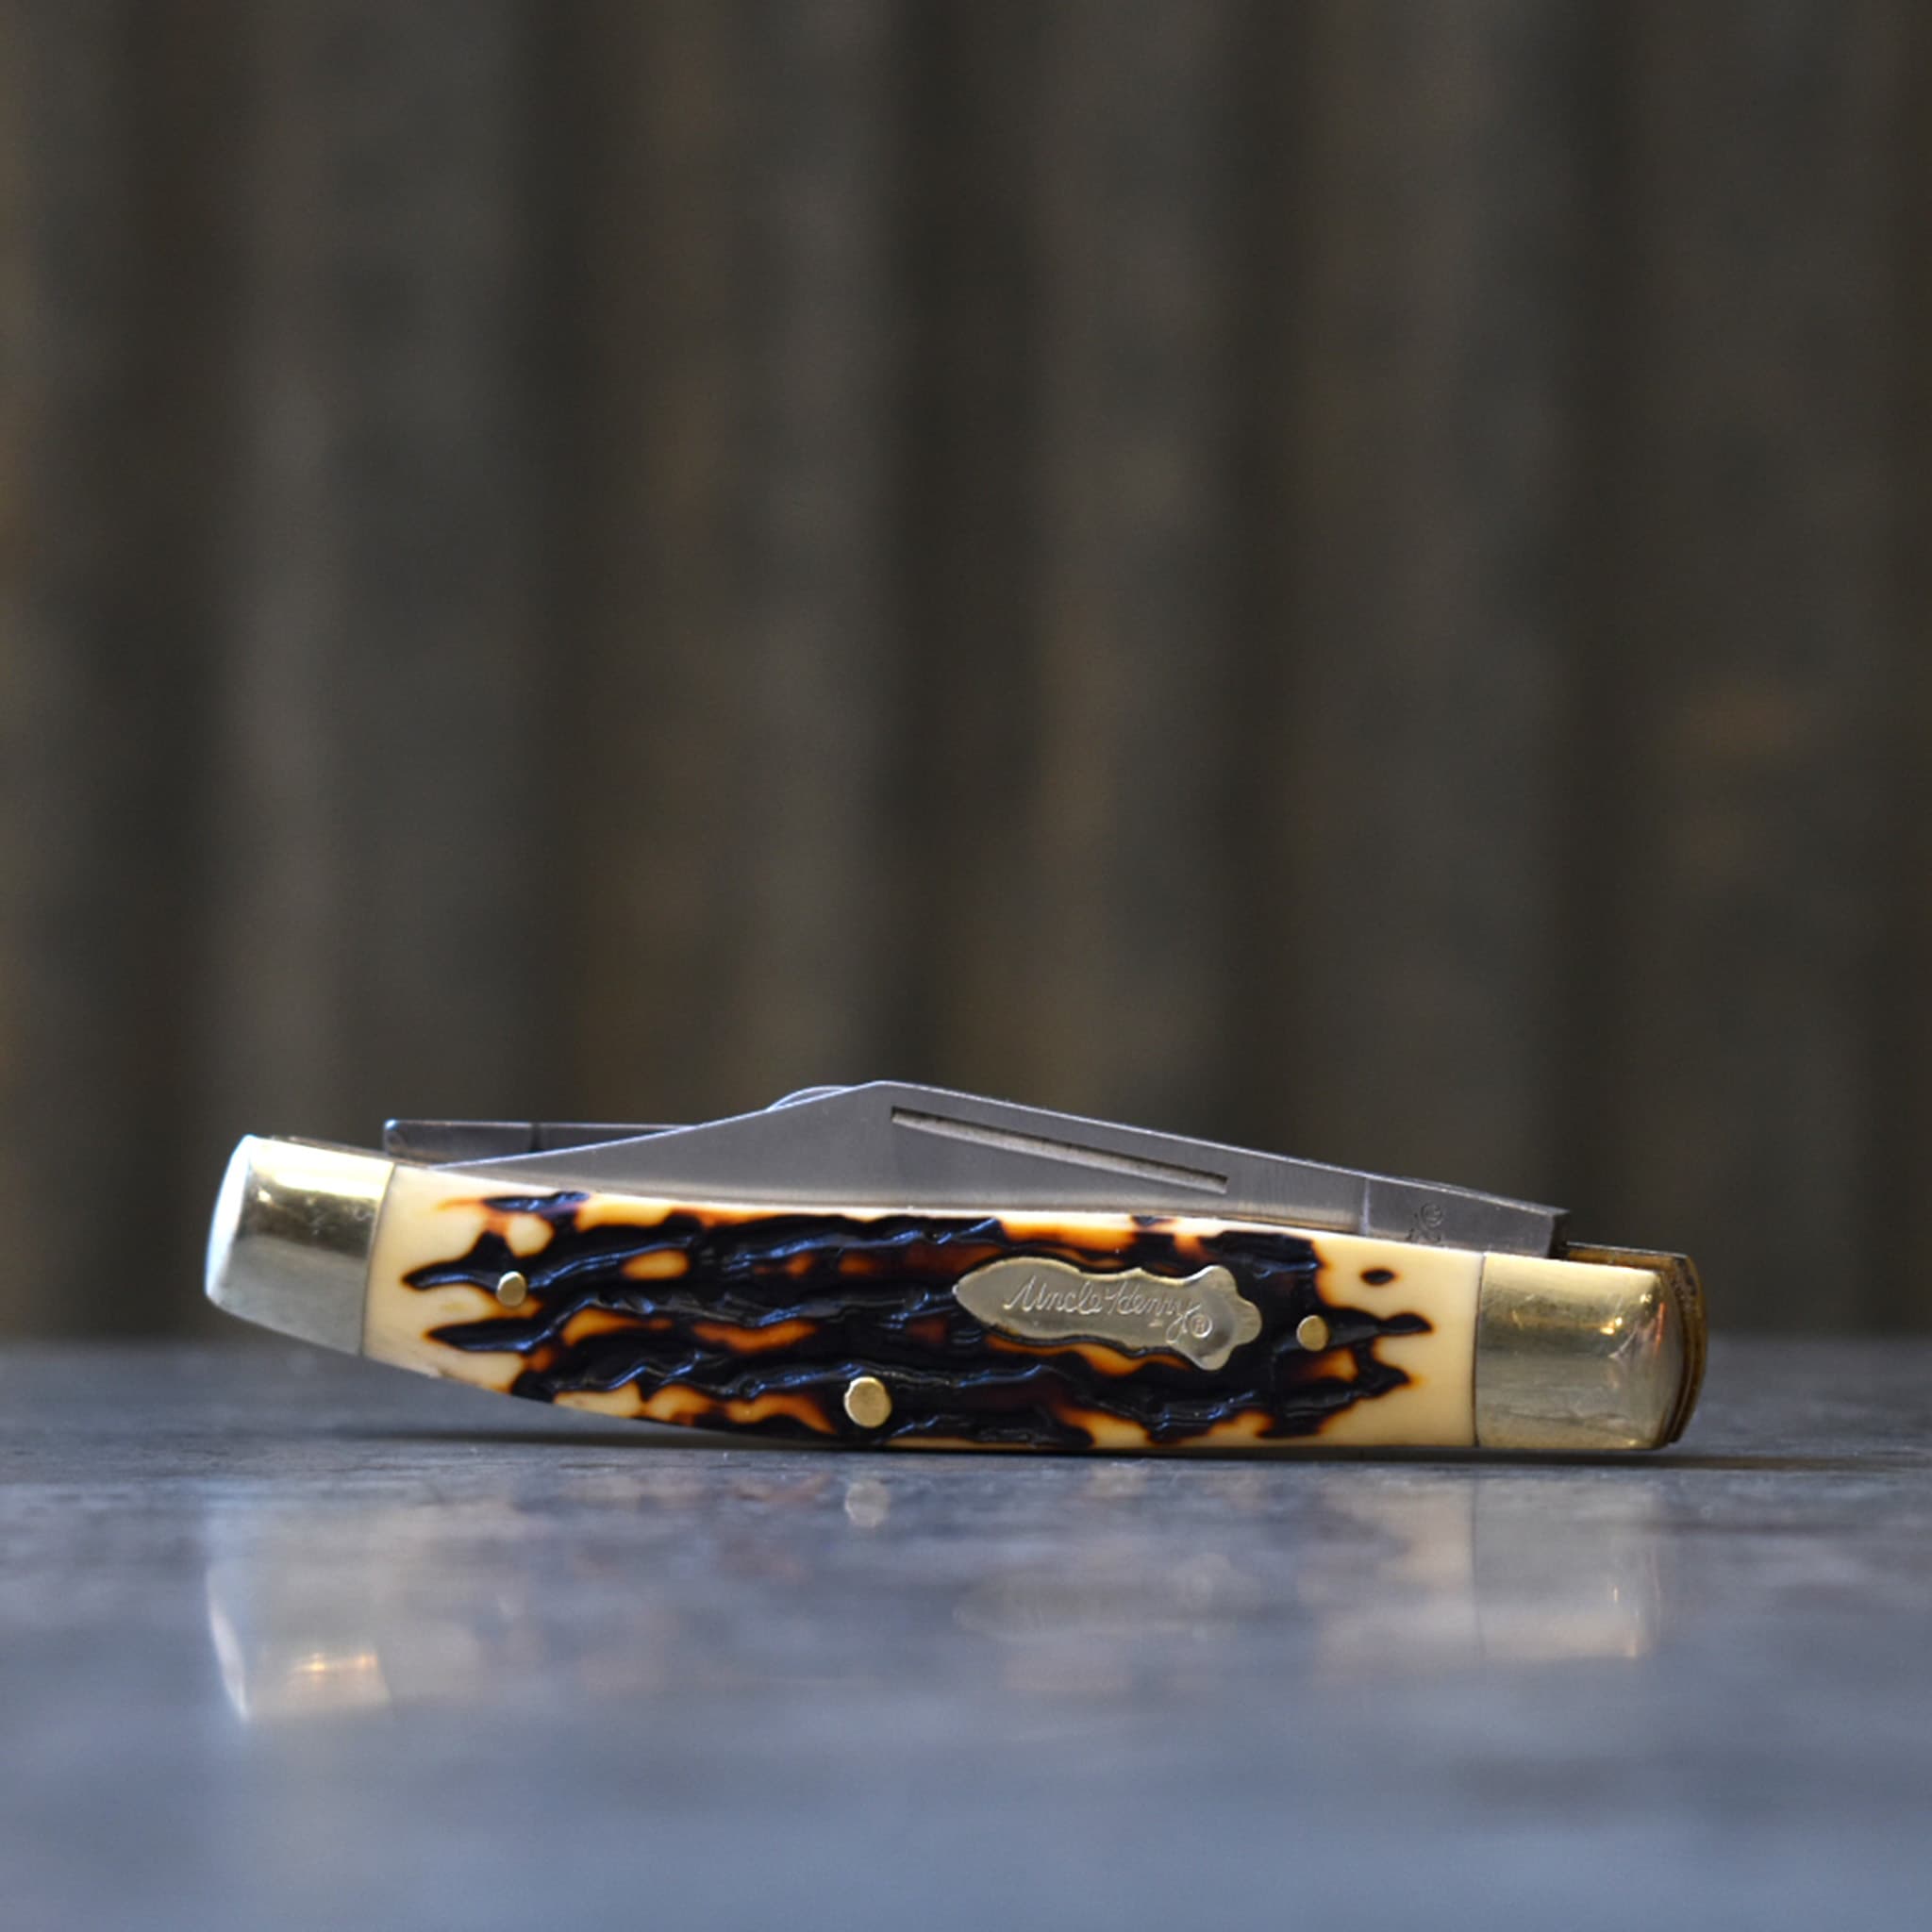 Uncle Henry Pocket Knife with blades closed.